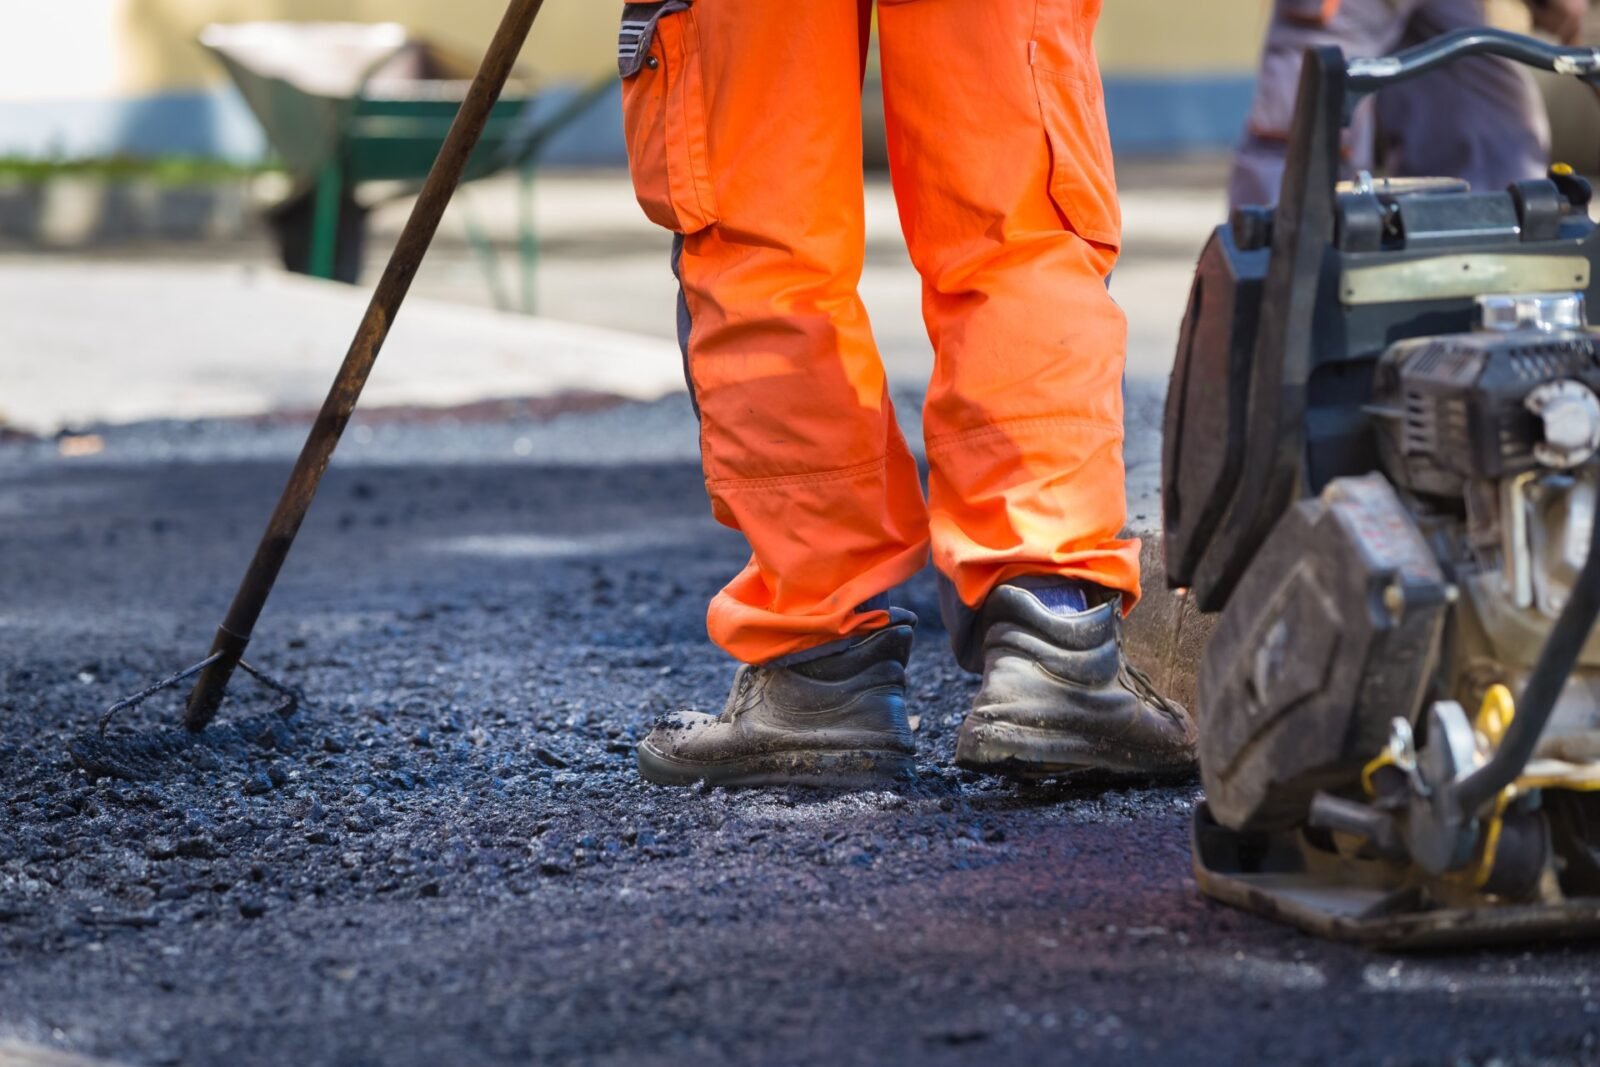 A construction worker wearing bright orange pants and sturdy boots stands on freshly laid asphalt while holding a tool. Another piece of construction equipment is visible on the right side of the image, alongside a wheelbarrow in the blurred background, showcasing Palm Beach Asphalt's meticulous craftsmanship.